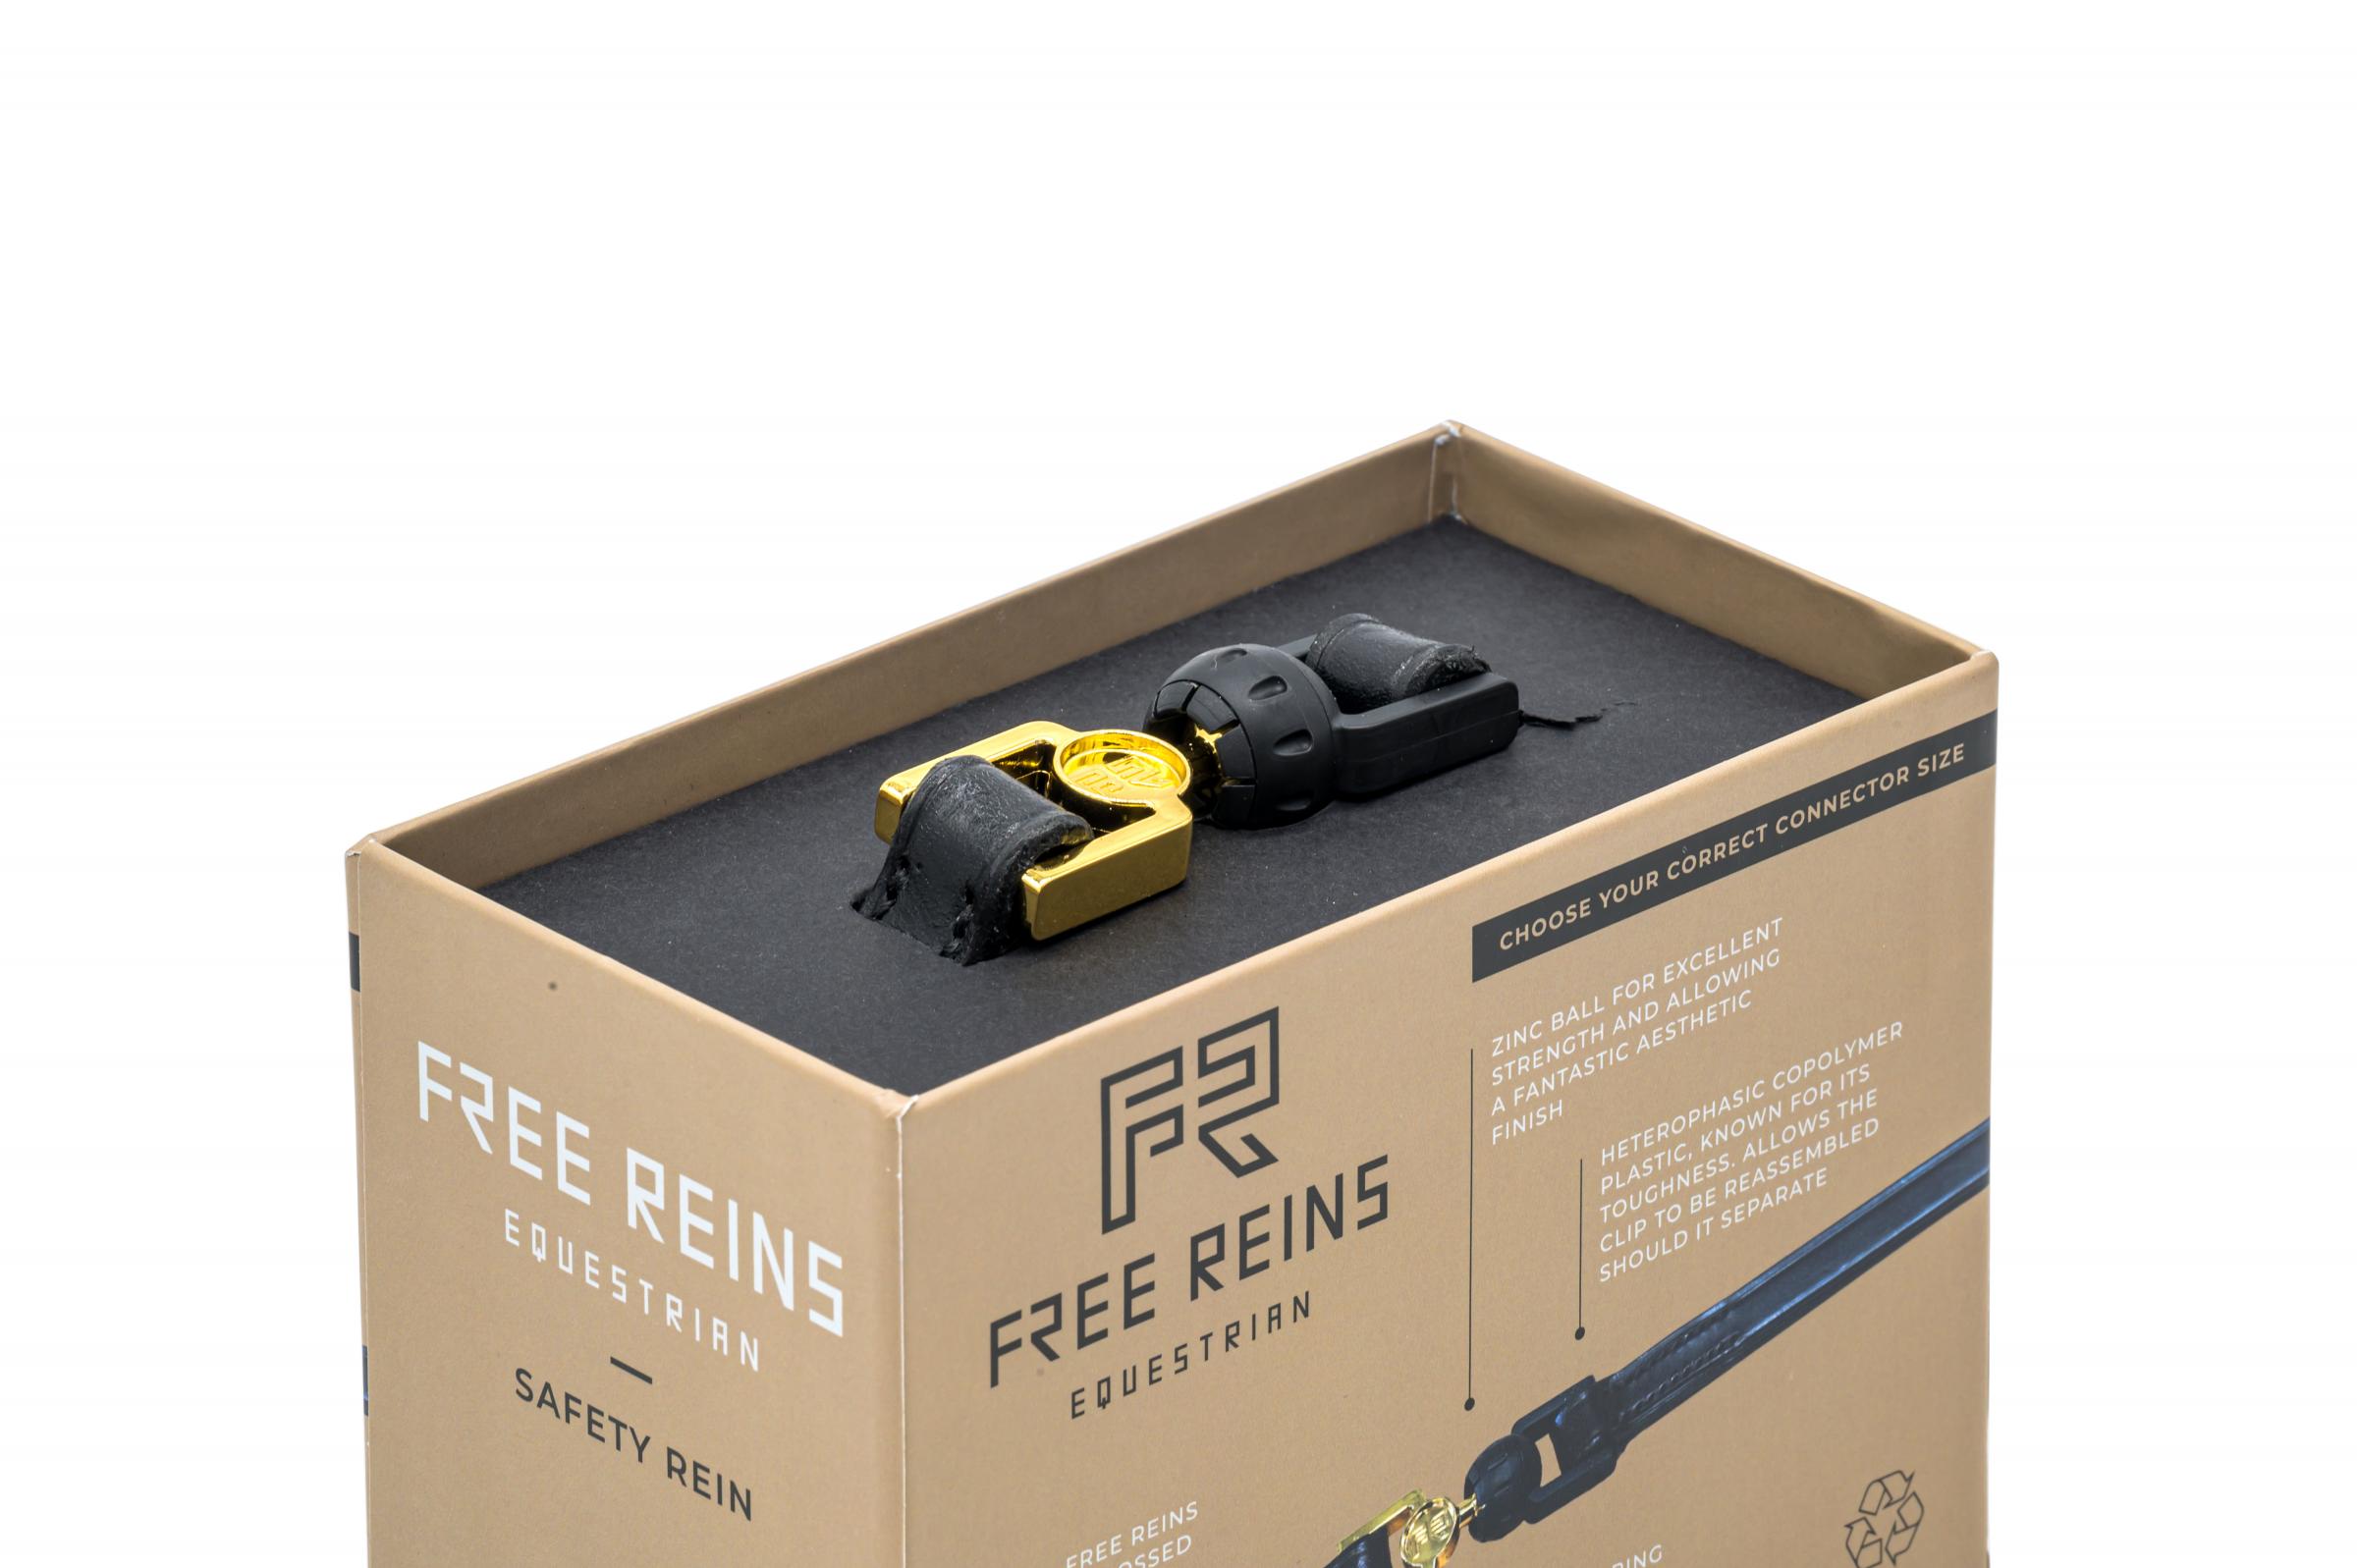 The Free Reins package. Picture: Dan Holbrook.